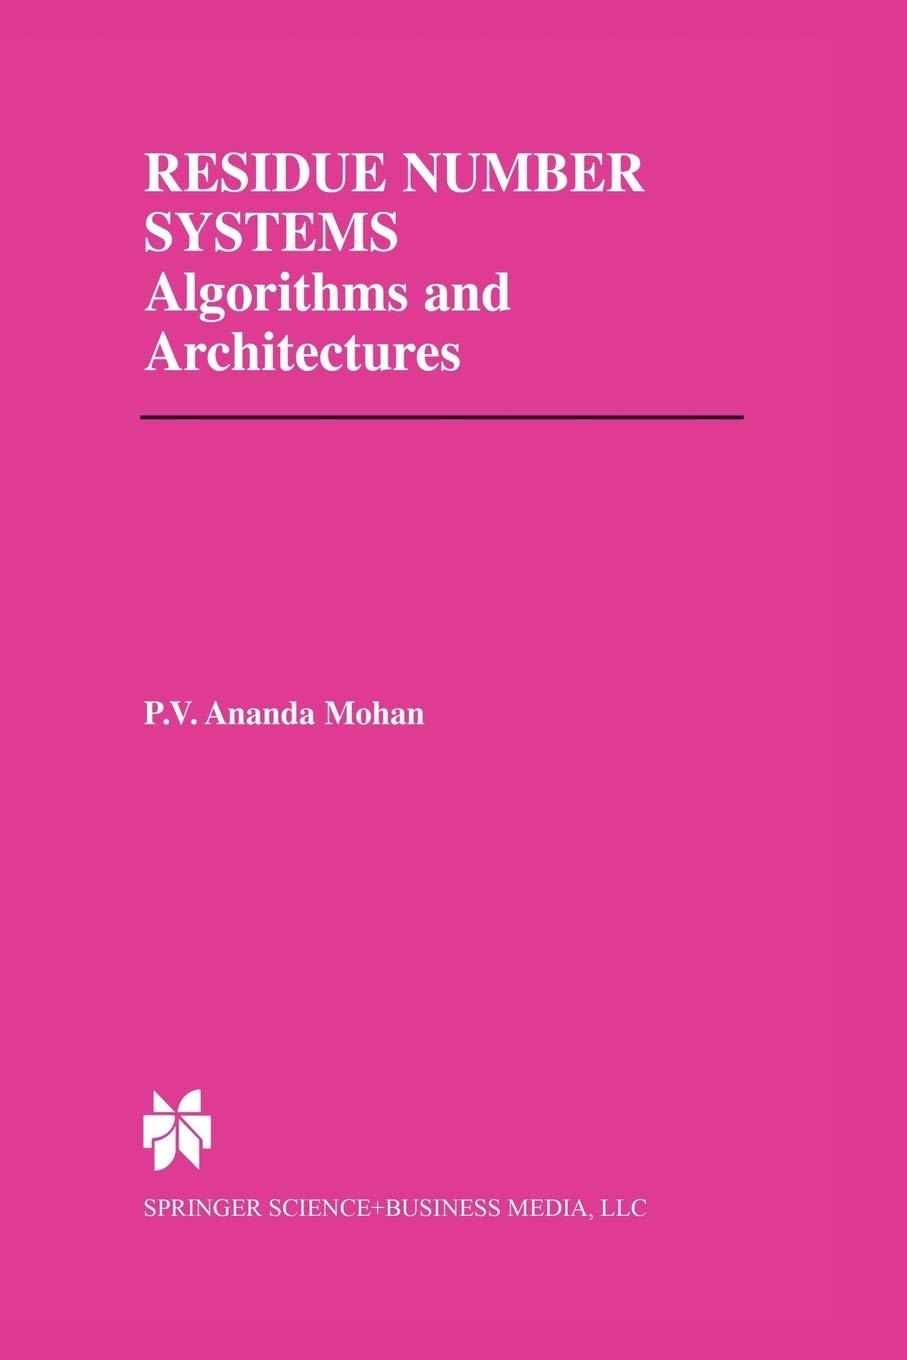 residue number systems algorithms and architectures 2002 edition p.v. ananda mohan 1461353432, 978-1461353430